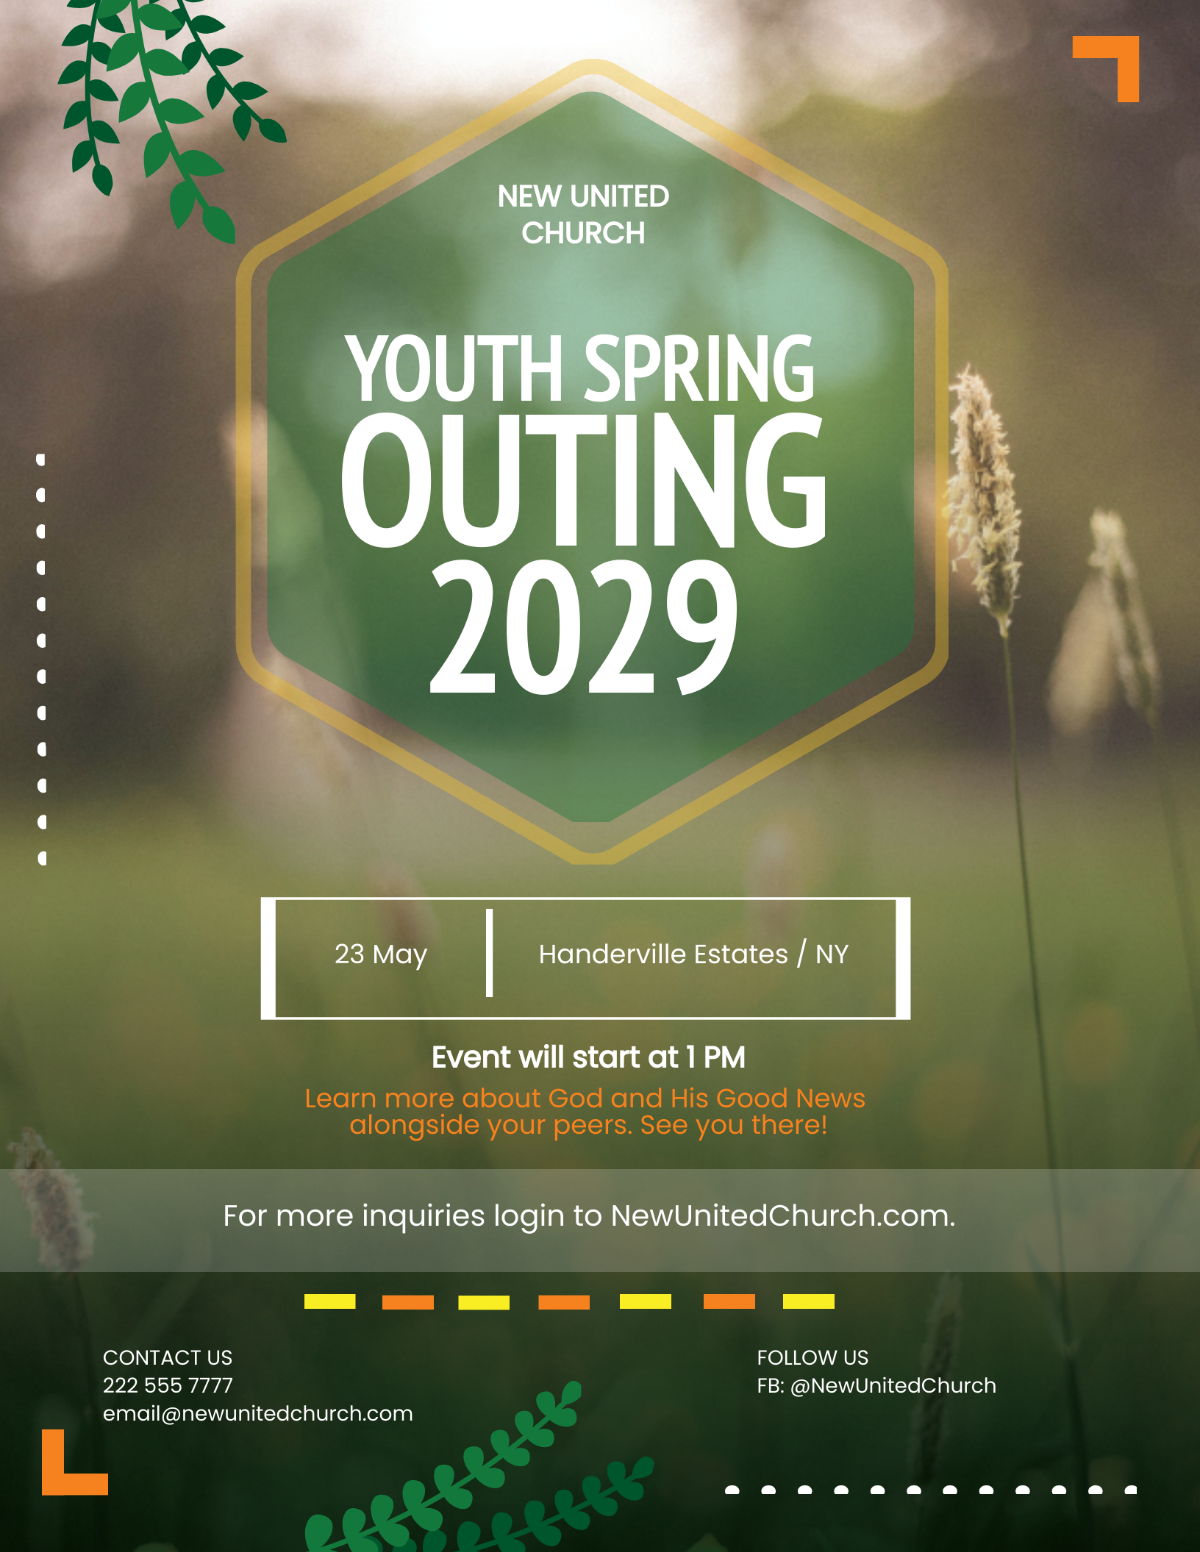 Youth Spring Outing Church Flyer Template